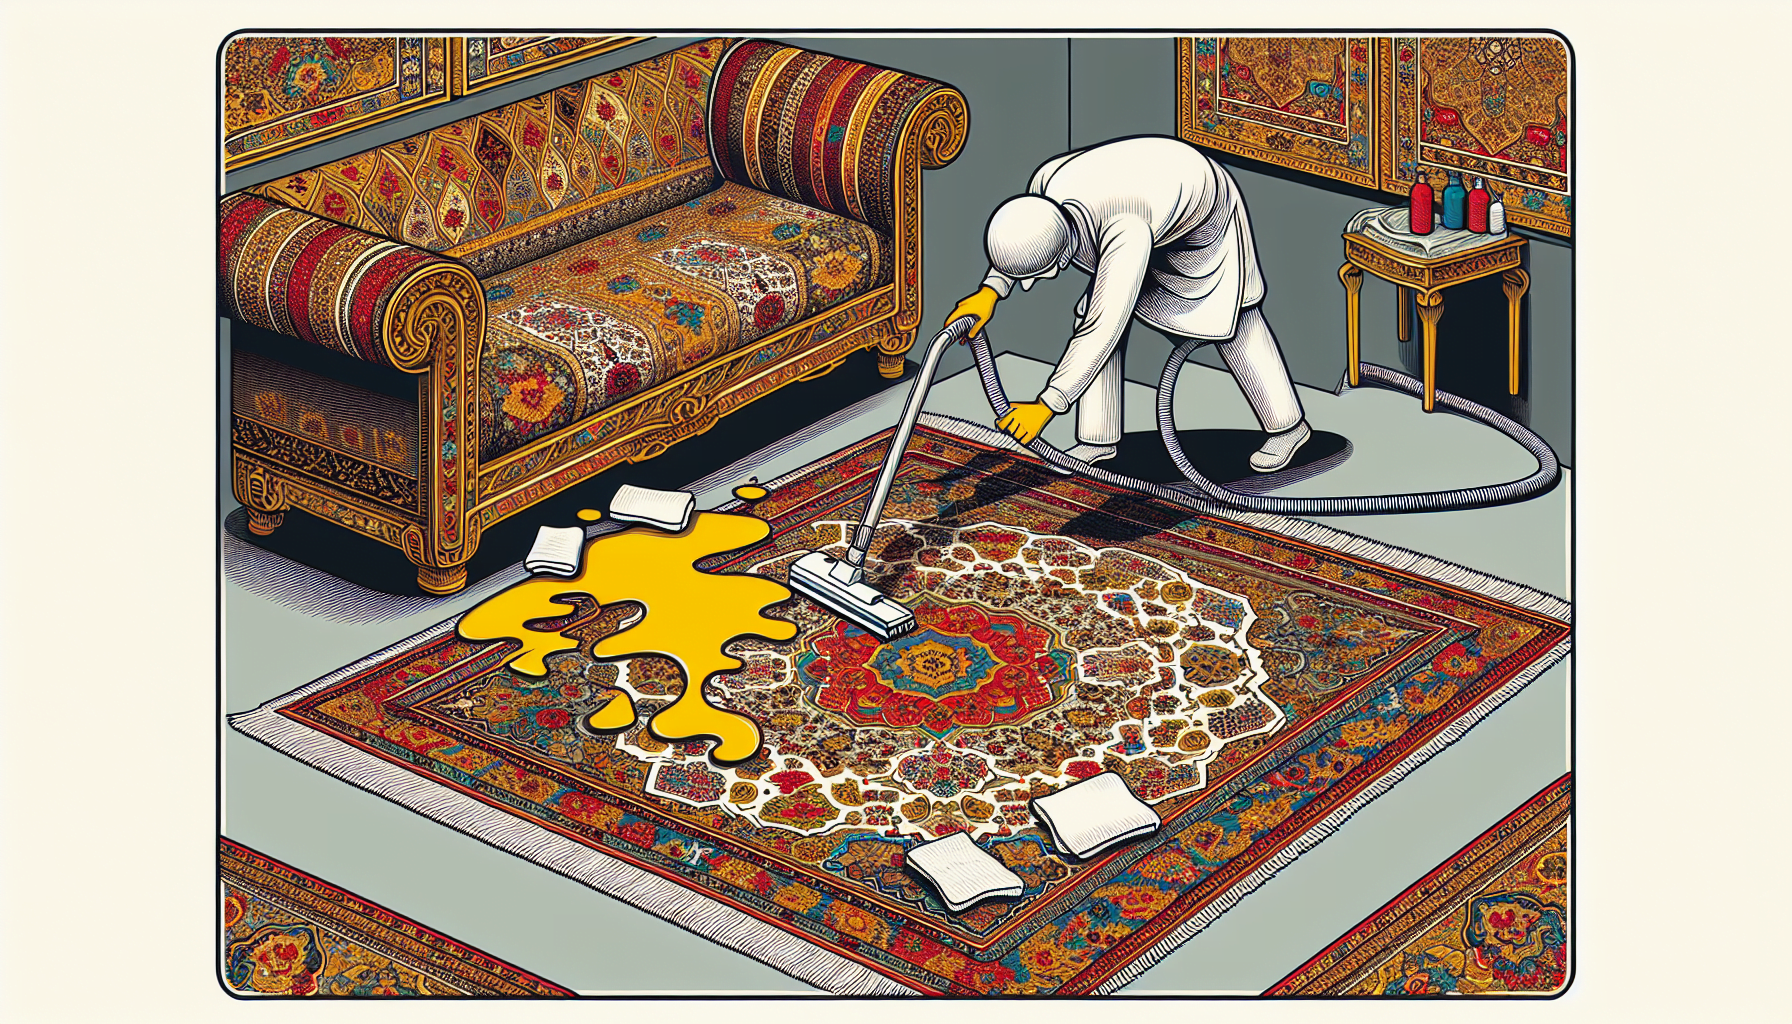 Illustration of cleaning and maintenance of persian rug